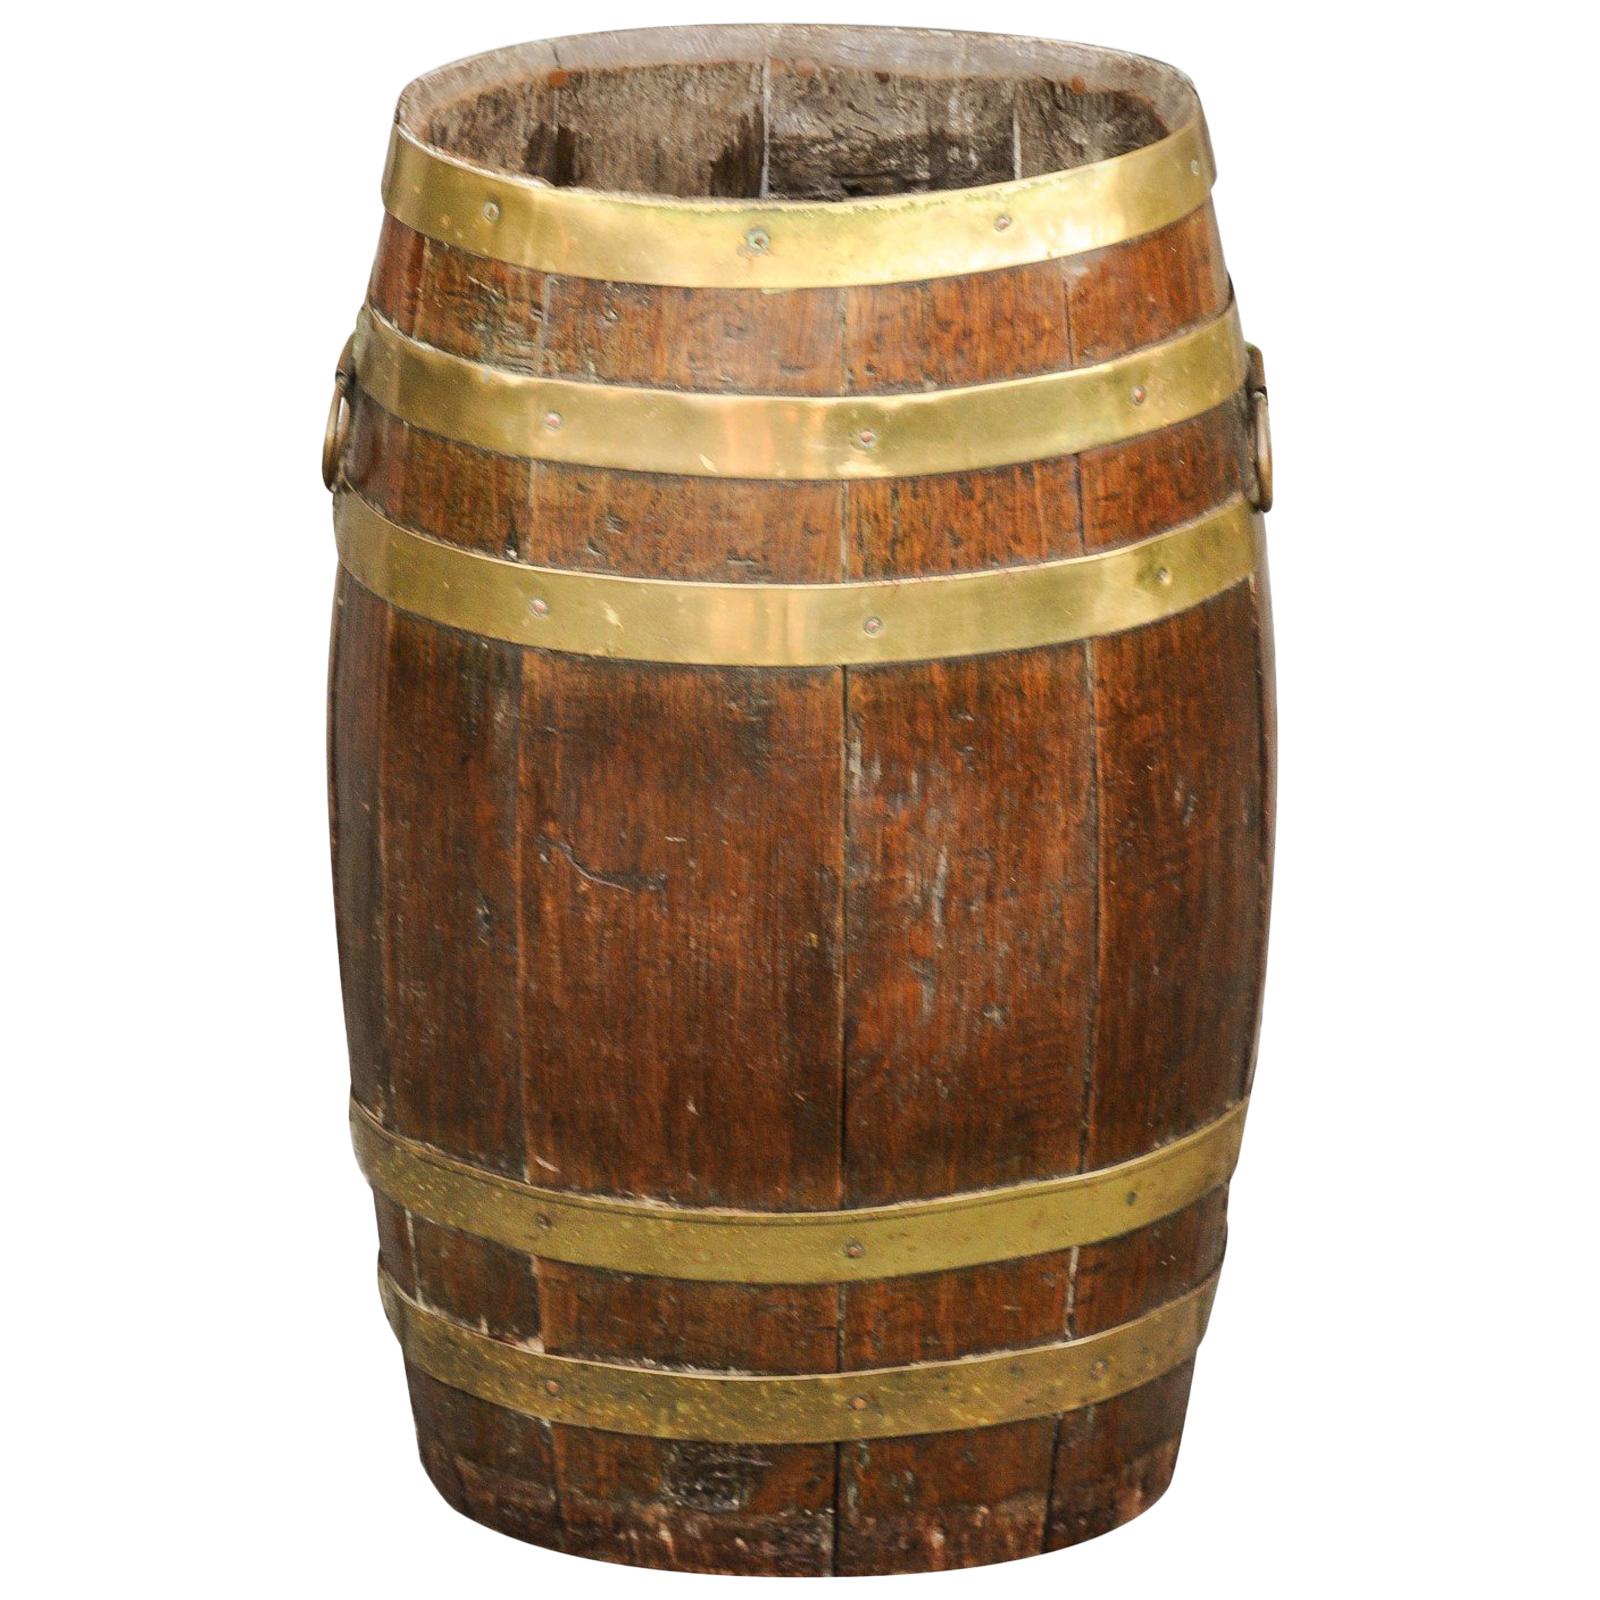 Tall Rustic English Oval Oak Barrel with Brass Braces and Handles, circa 1880